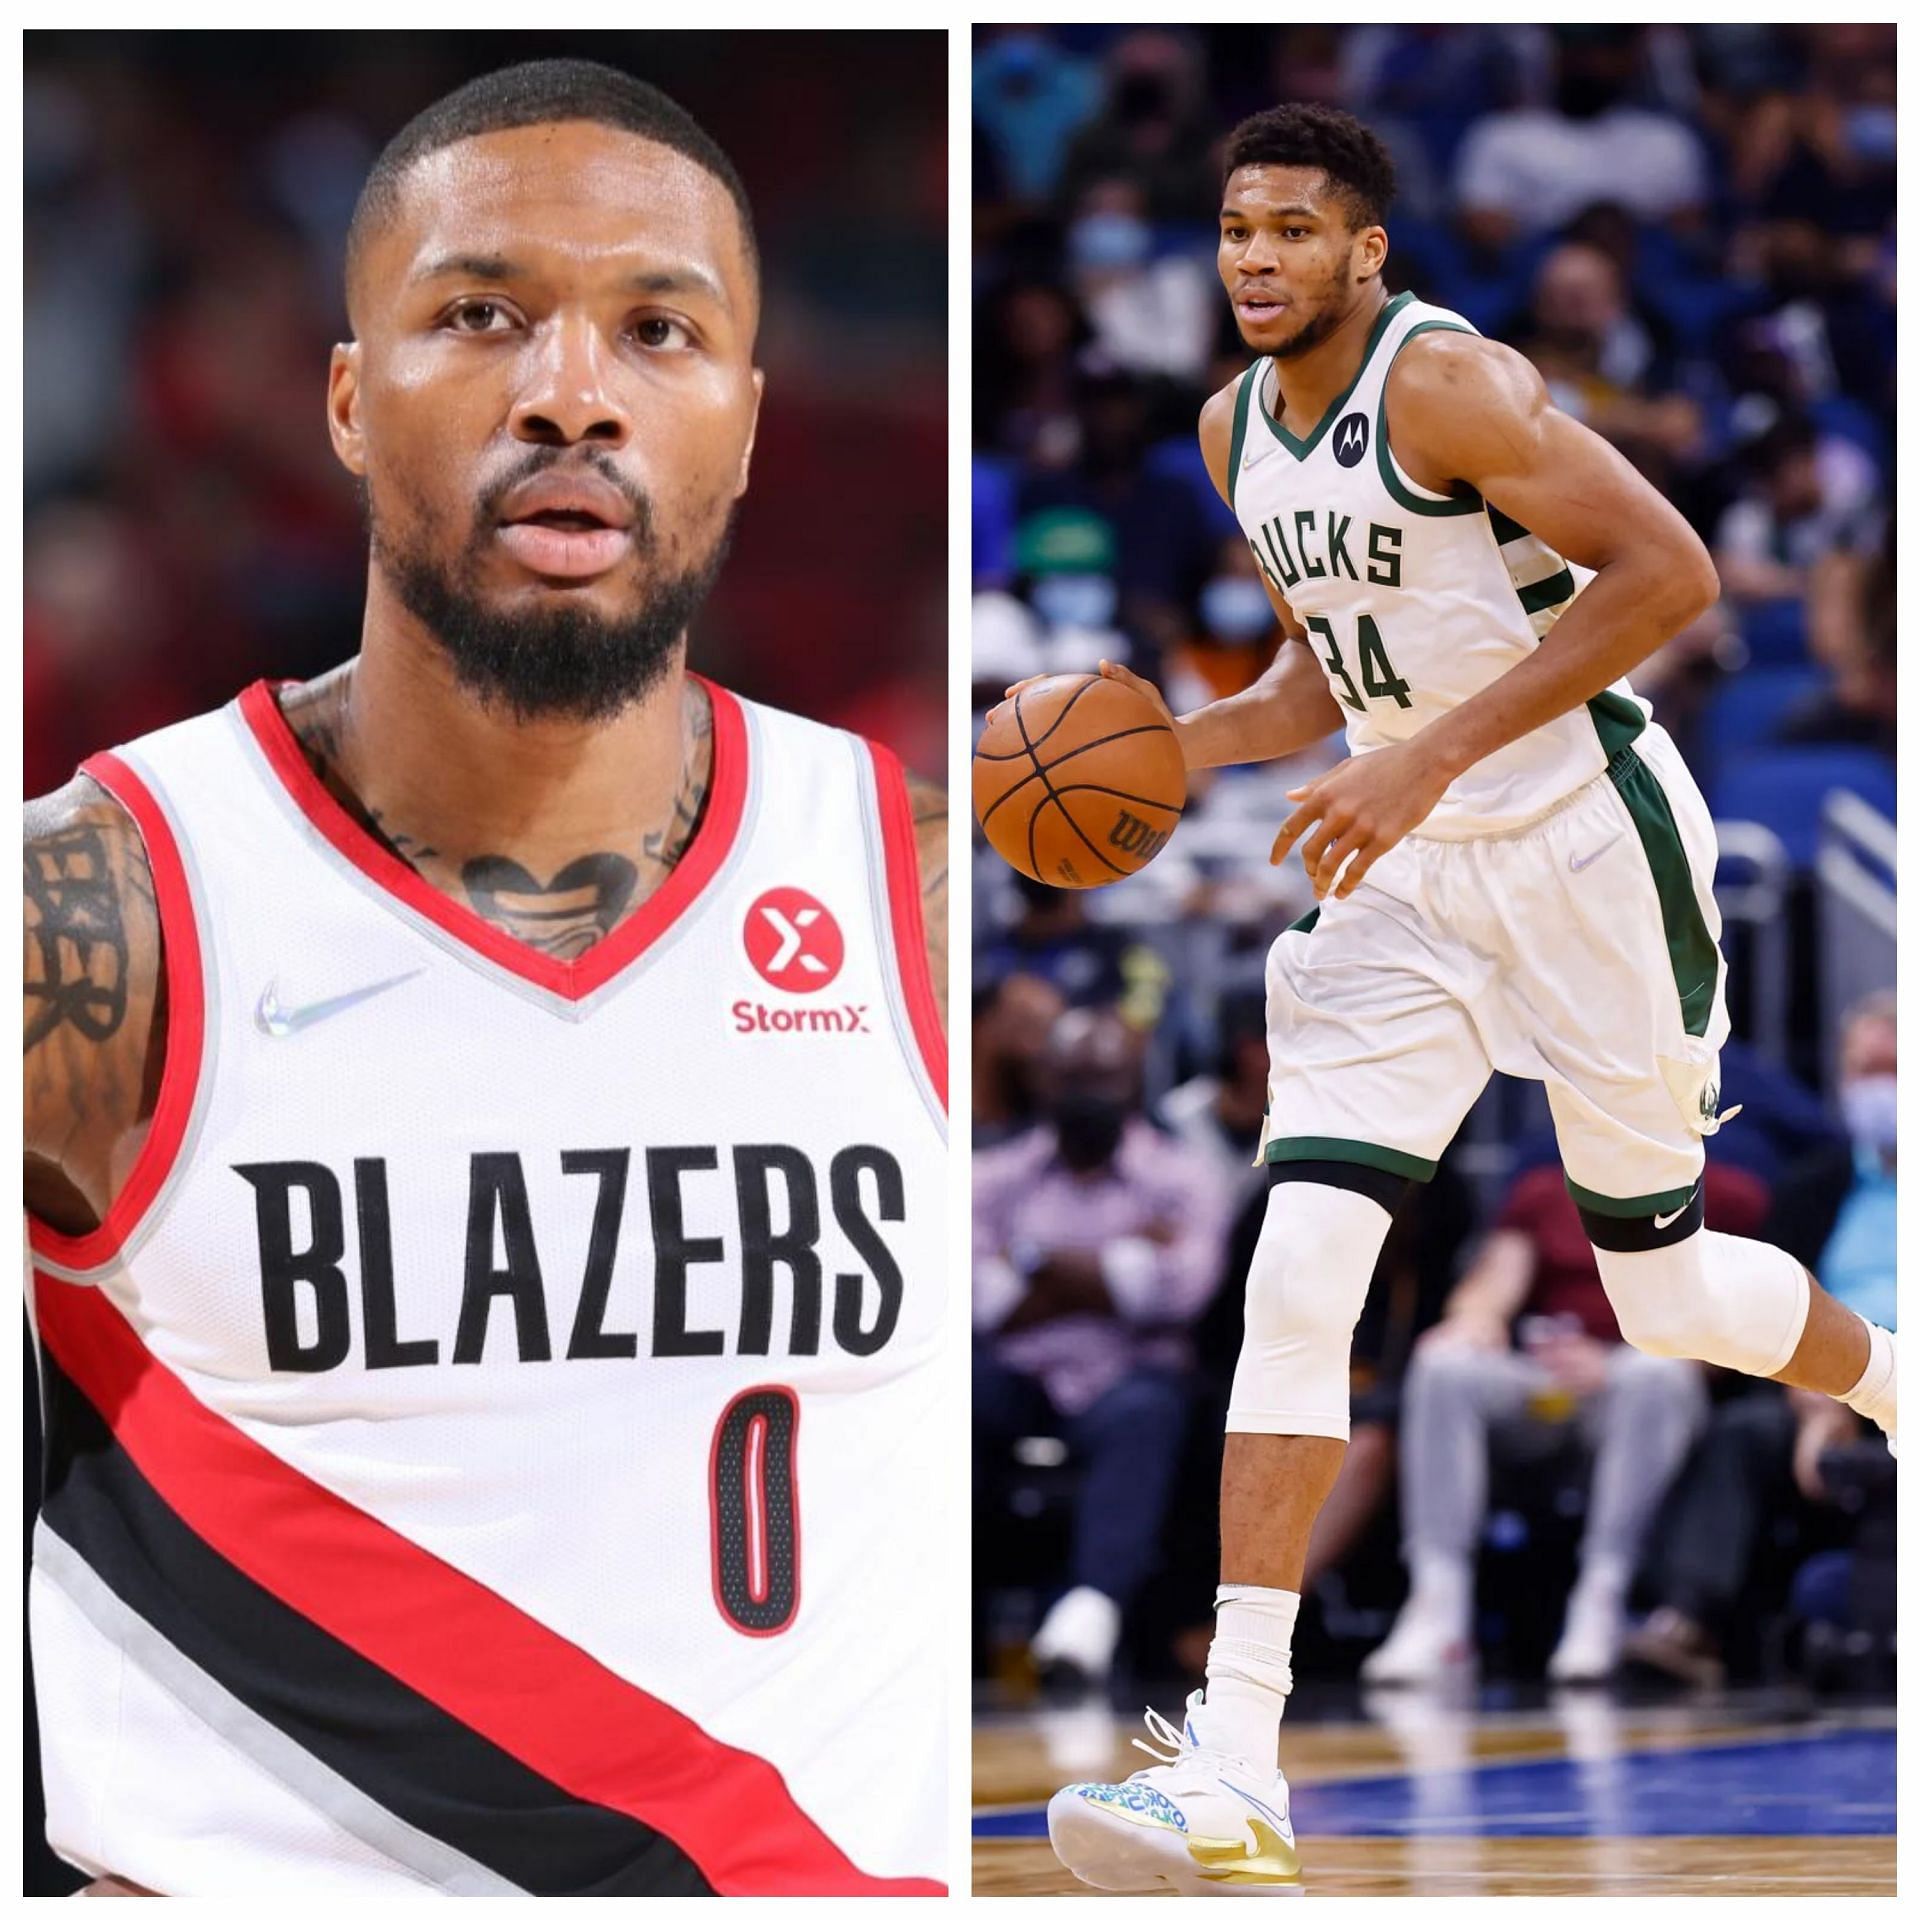 Damian Lillard picked Giannis Antetokounmpo as dream teammate 16 months before being traded to Milwaukee